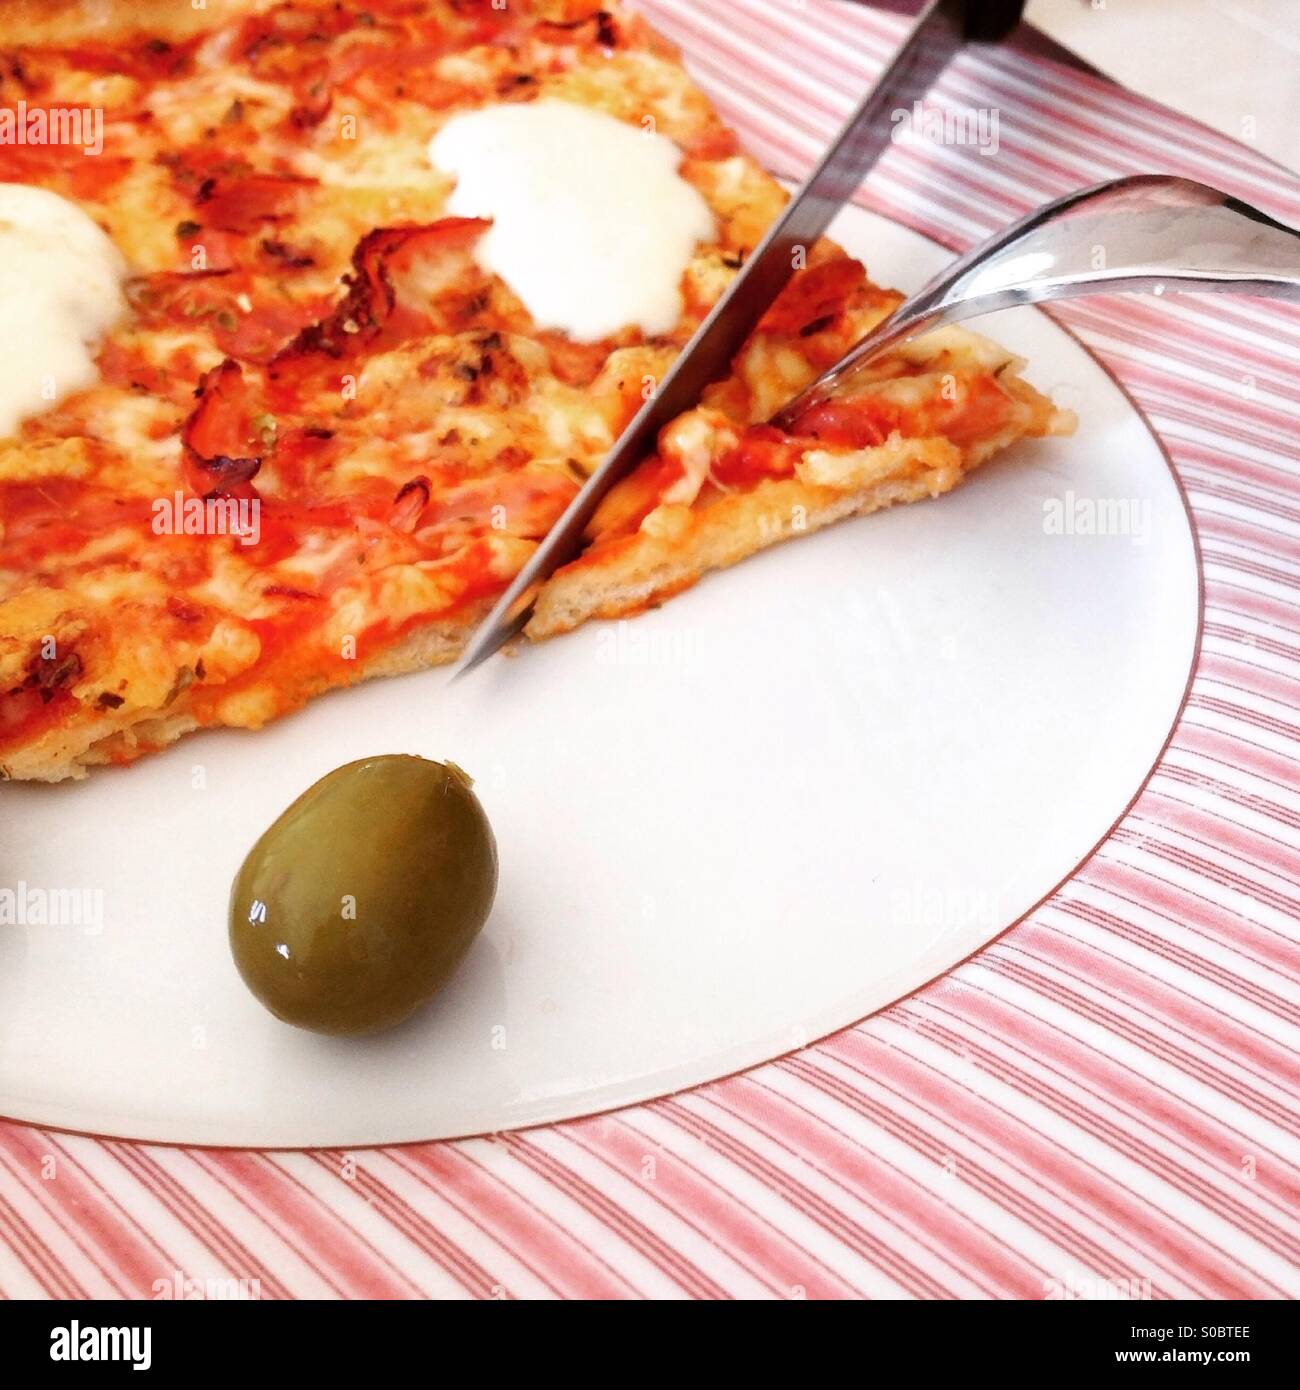 Slice of pizza with green olive on plate Stock Photo